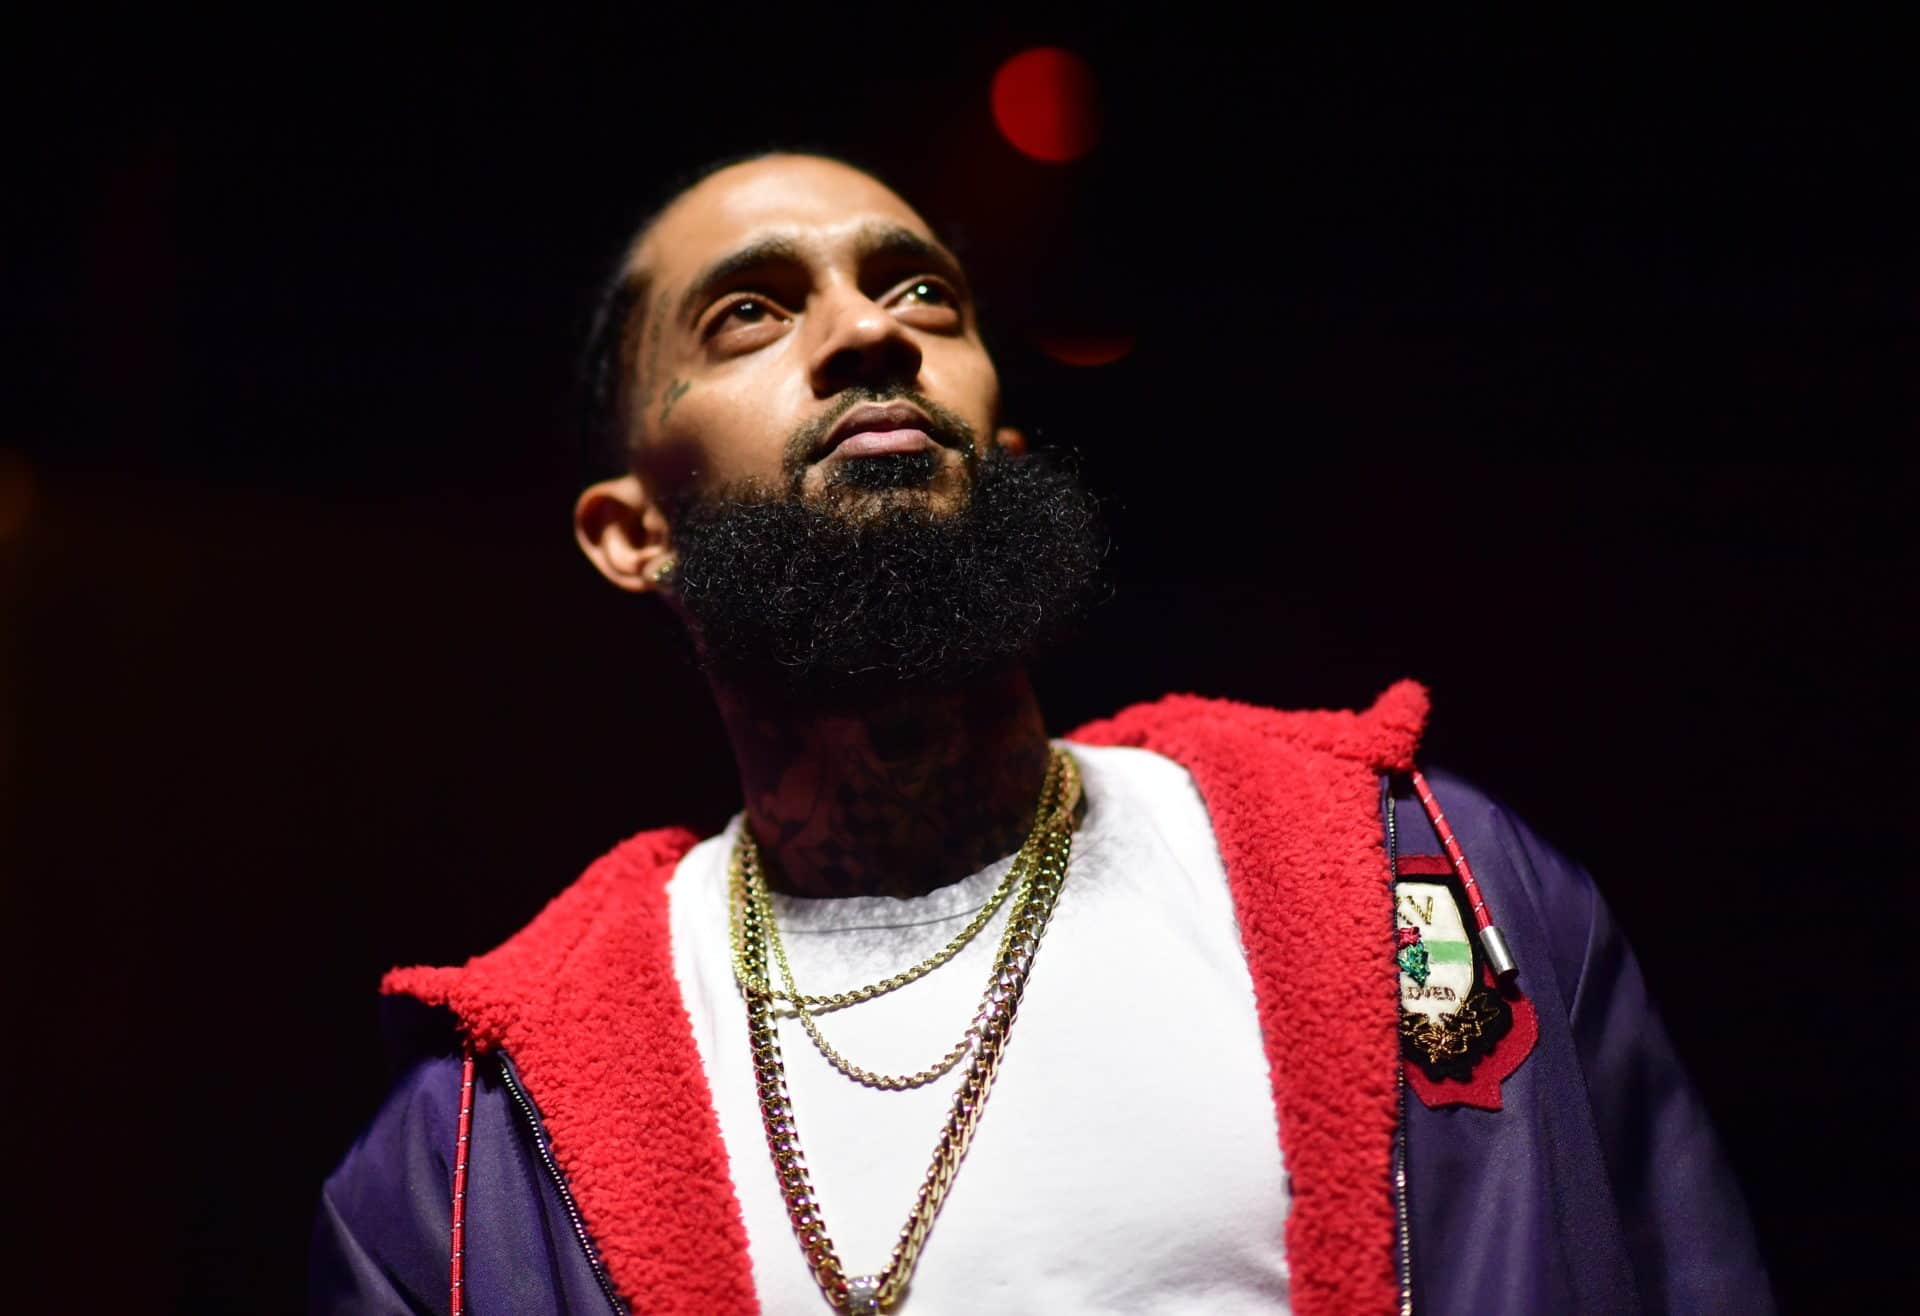 Nipsey Hussle Memorial To Be Held Thursday at Staples Center